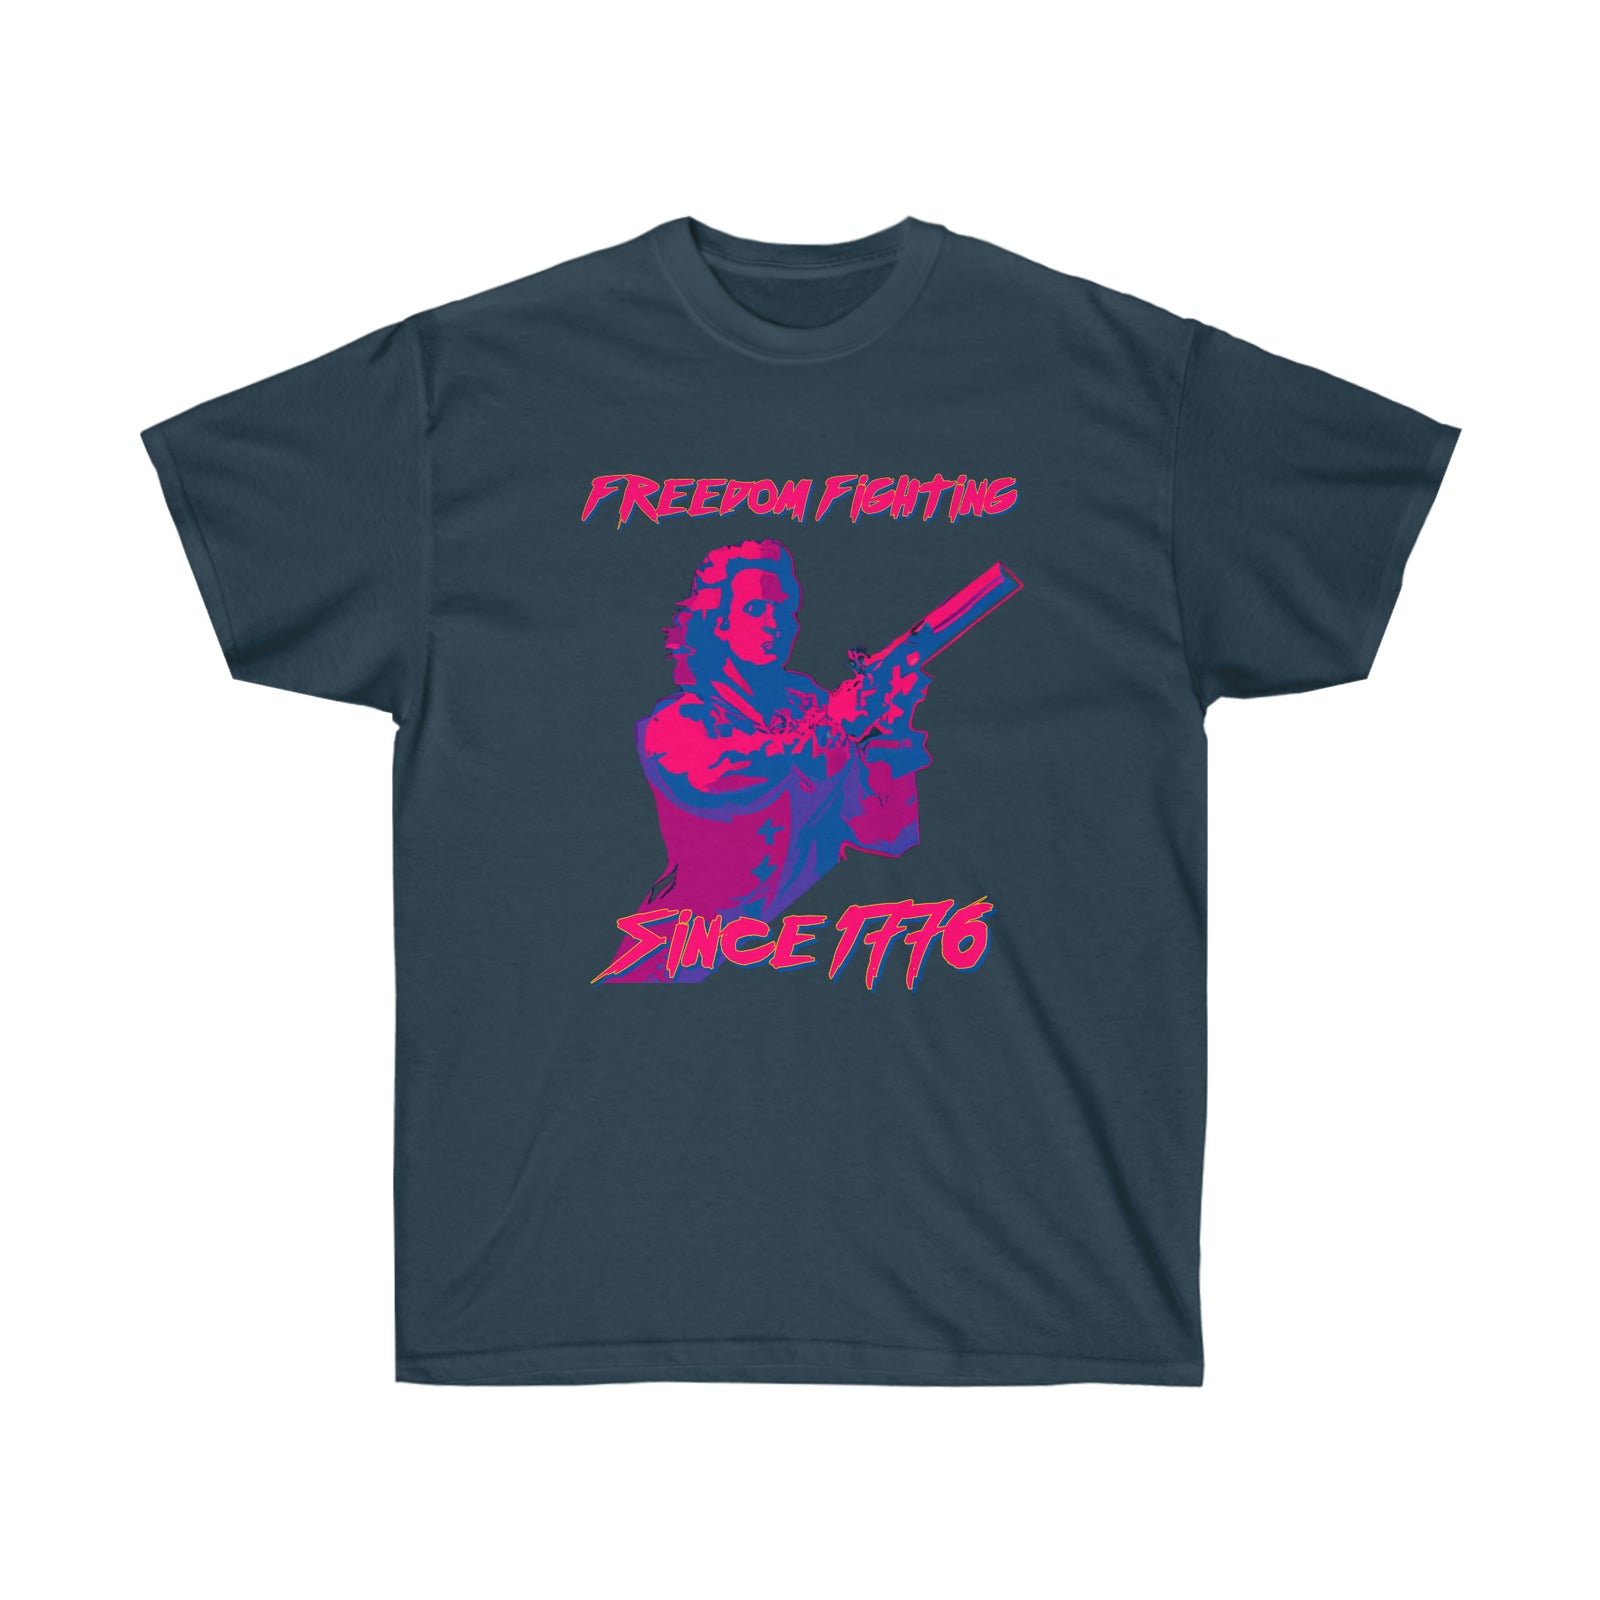 Freedom Fighting Since 1776 Synthwave Tee Shirt